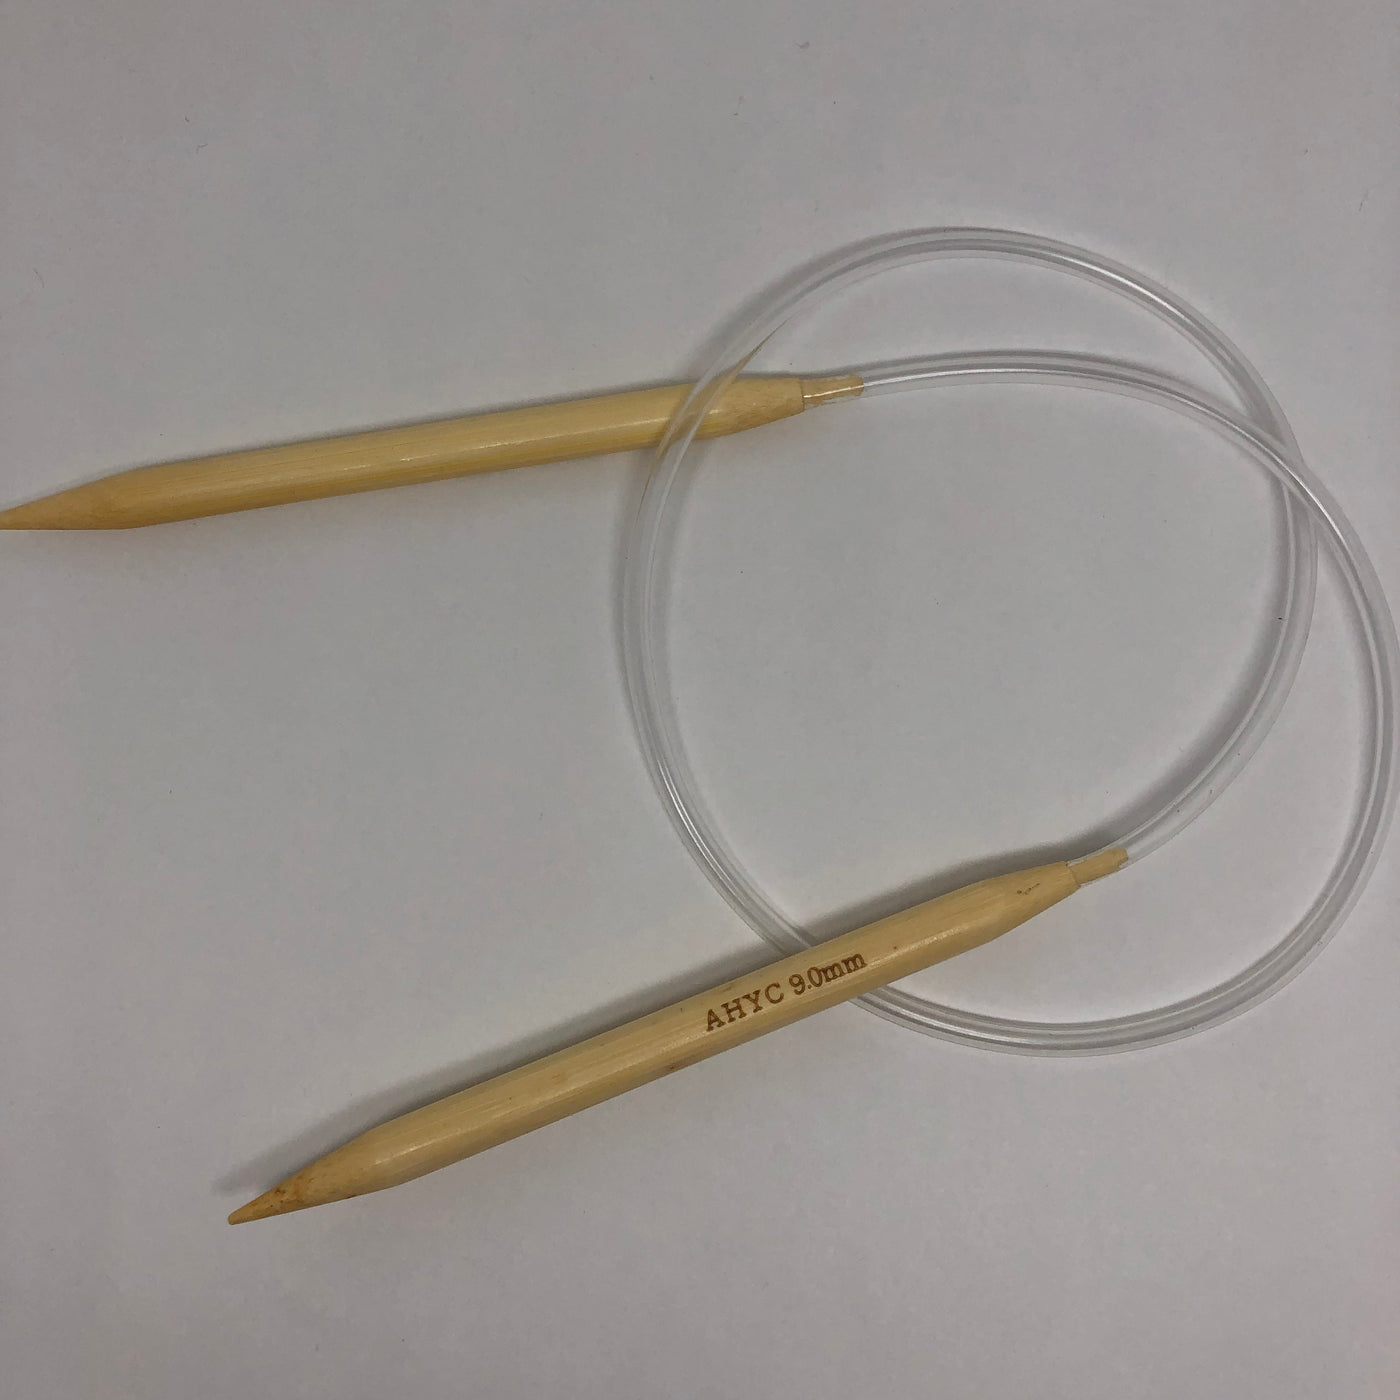 Where can I find bamboo circular knitting needles 9mm